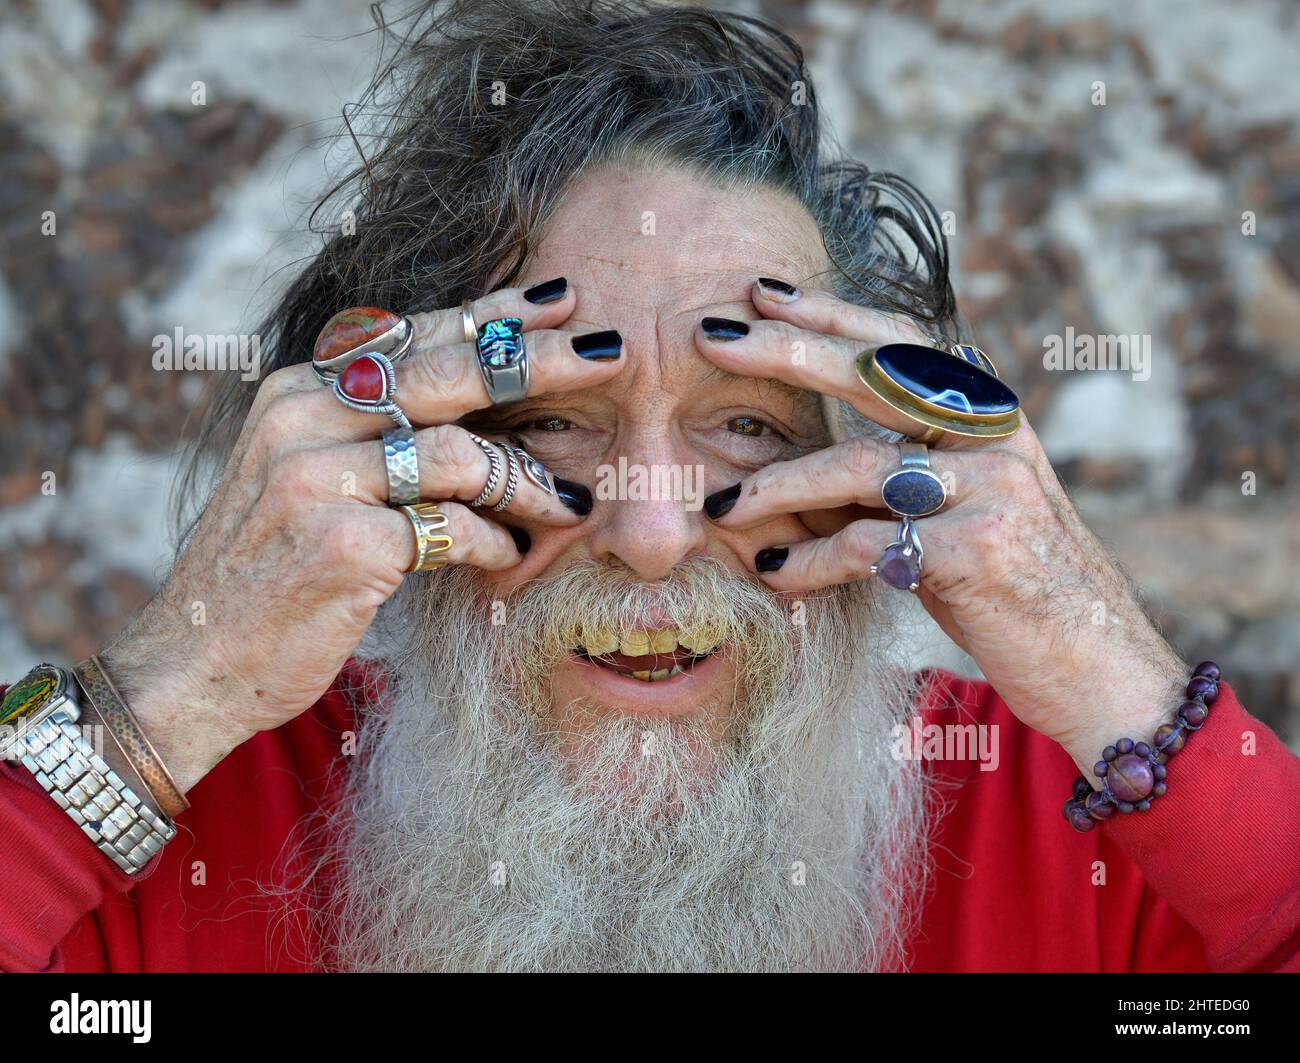 Elderly Caucasian man shows his eyes and expresses an optimistic see-the-positive alternative to the negative see-no-evil of the Three Wise Monkeys. Stock Photo